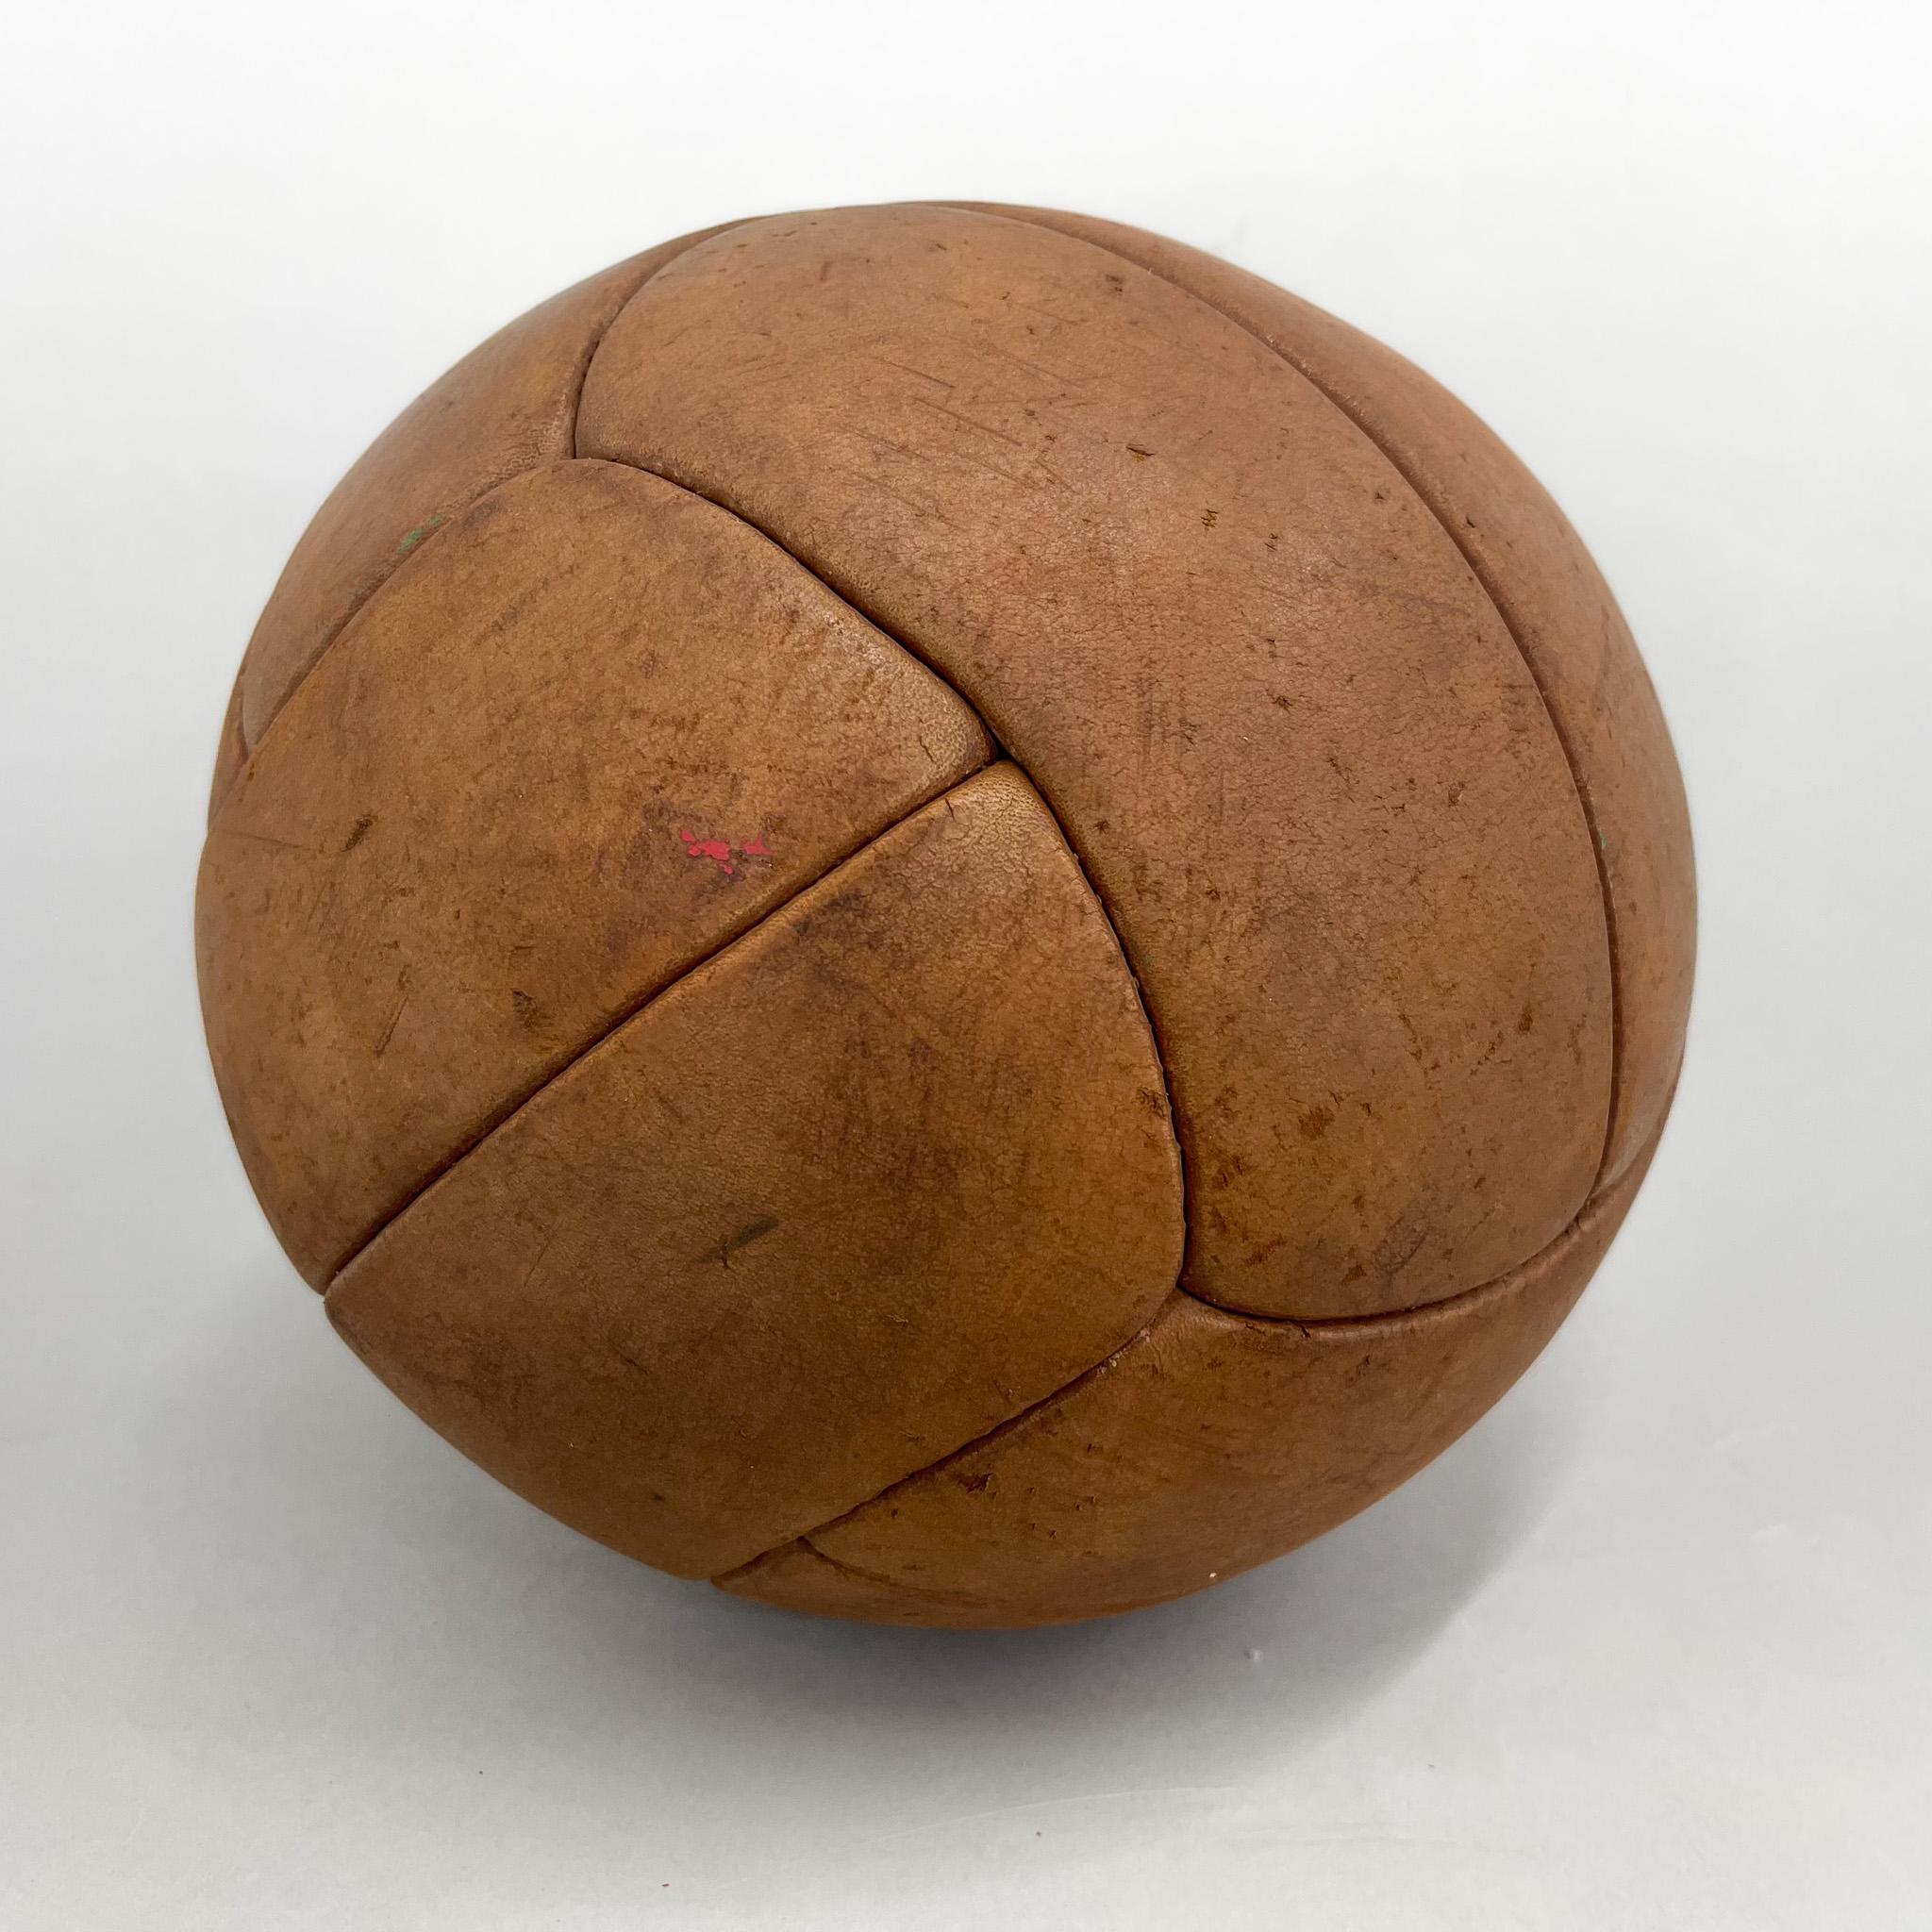 Original vintage heavy leather training ball with beautiful patina. The ball is made of hand-stitched genuine leather in former Czechoslovakia in the 1930's. It can be used as an original interior accessory or as a stylish training aid. The leather